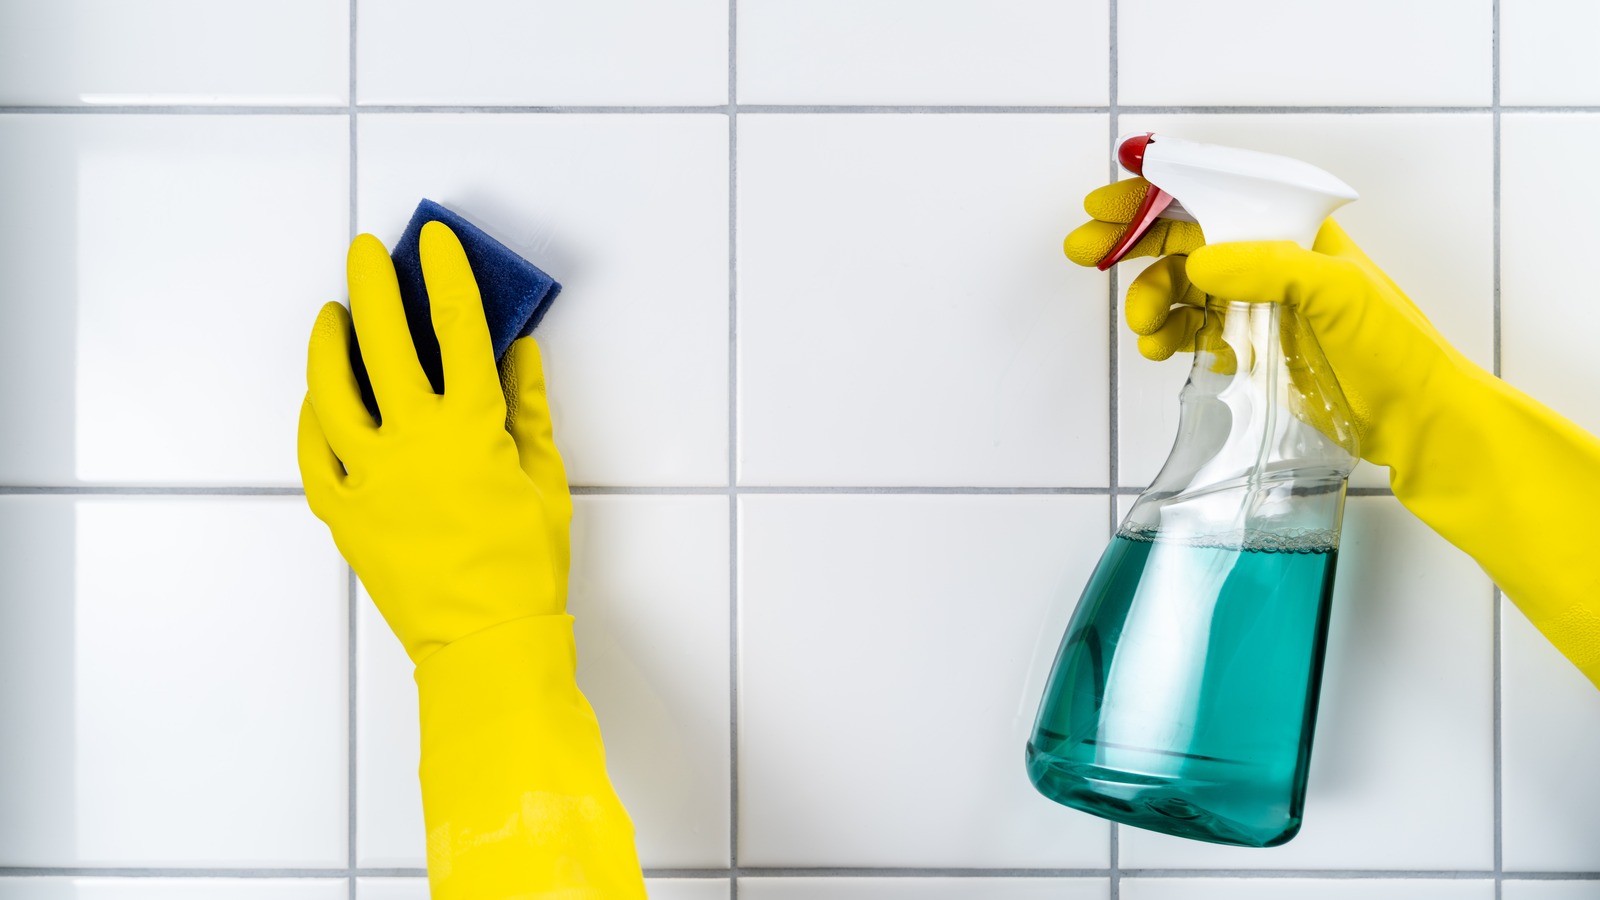 https://www.housedigest.com/img/gallery/the-5-best-grout-cleaners-you-need-for-your-home/l-intro-1668683192.jpg